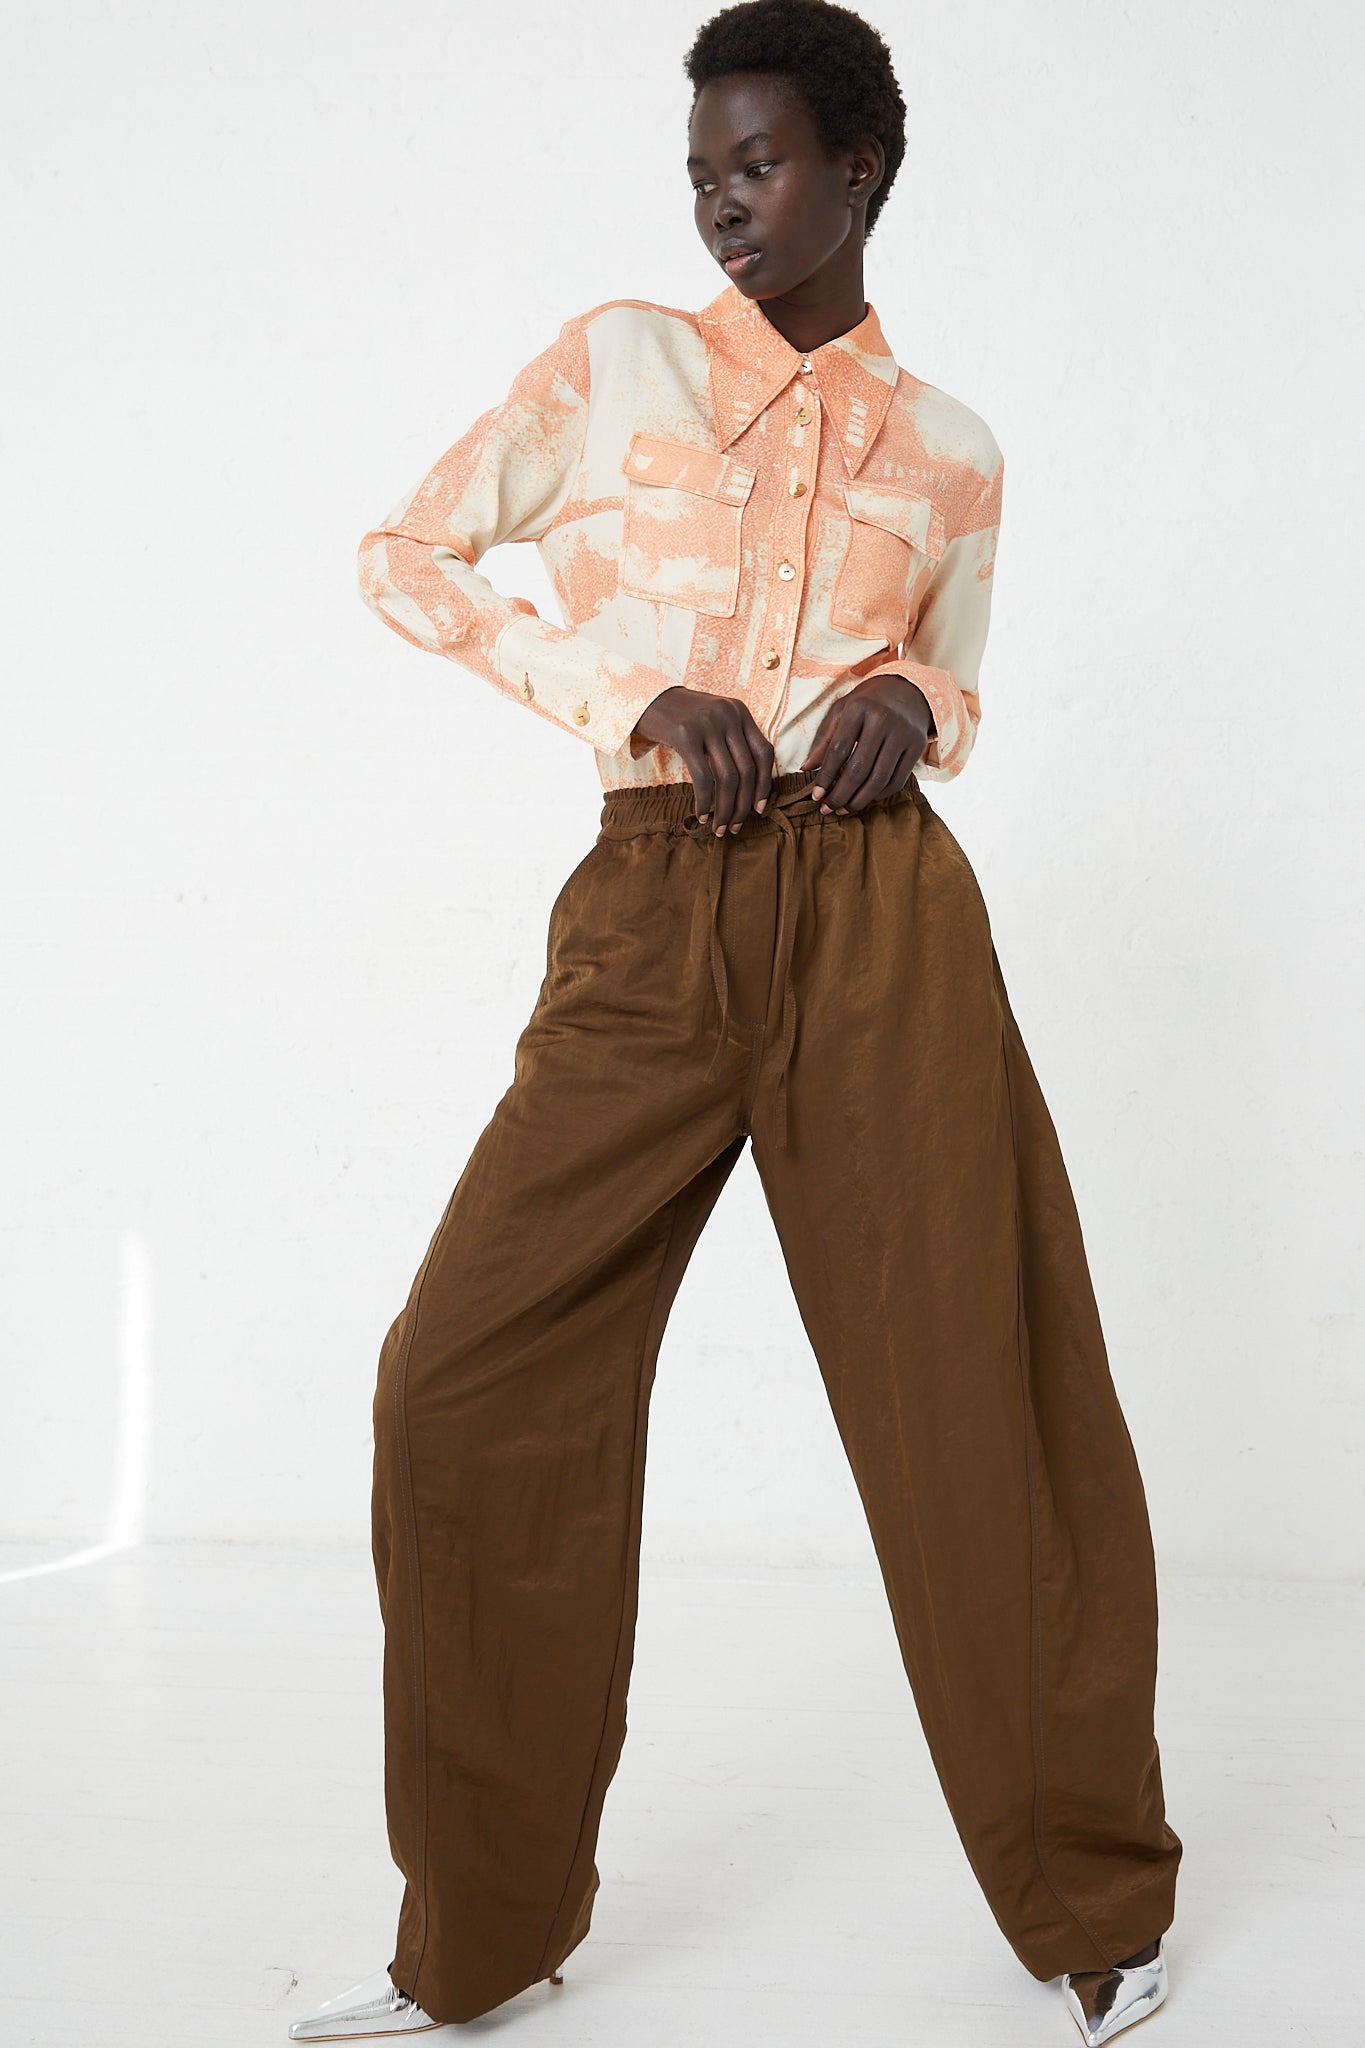 A model wearing Rejina Pyo's Nylon Una Trousers in Brown with contrast stitching and an orange shirt.